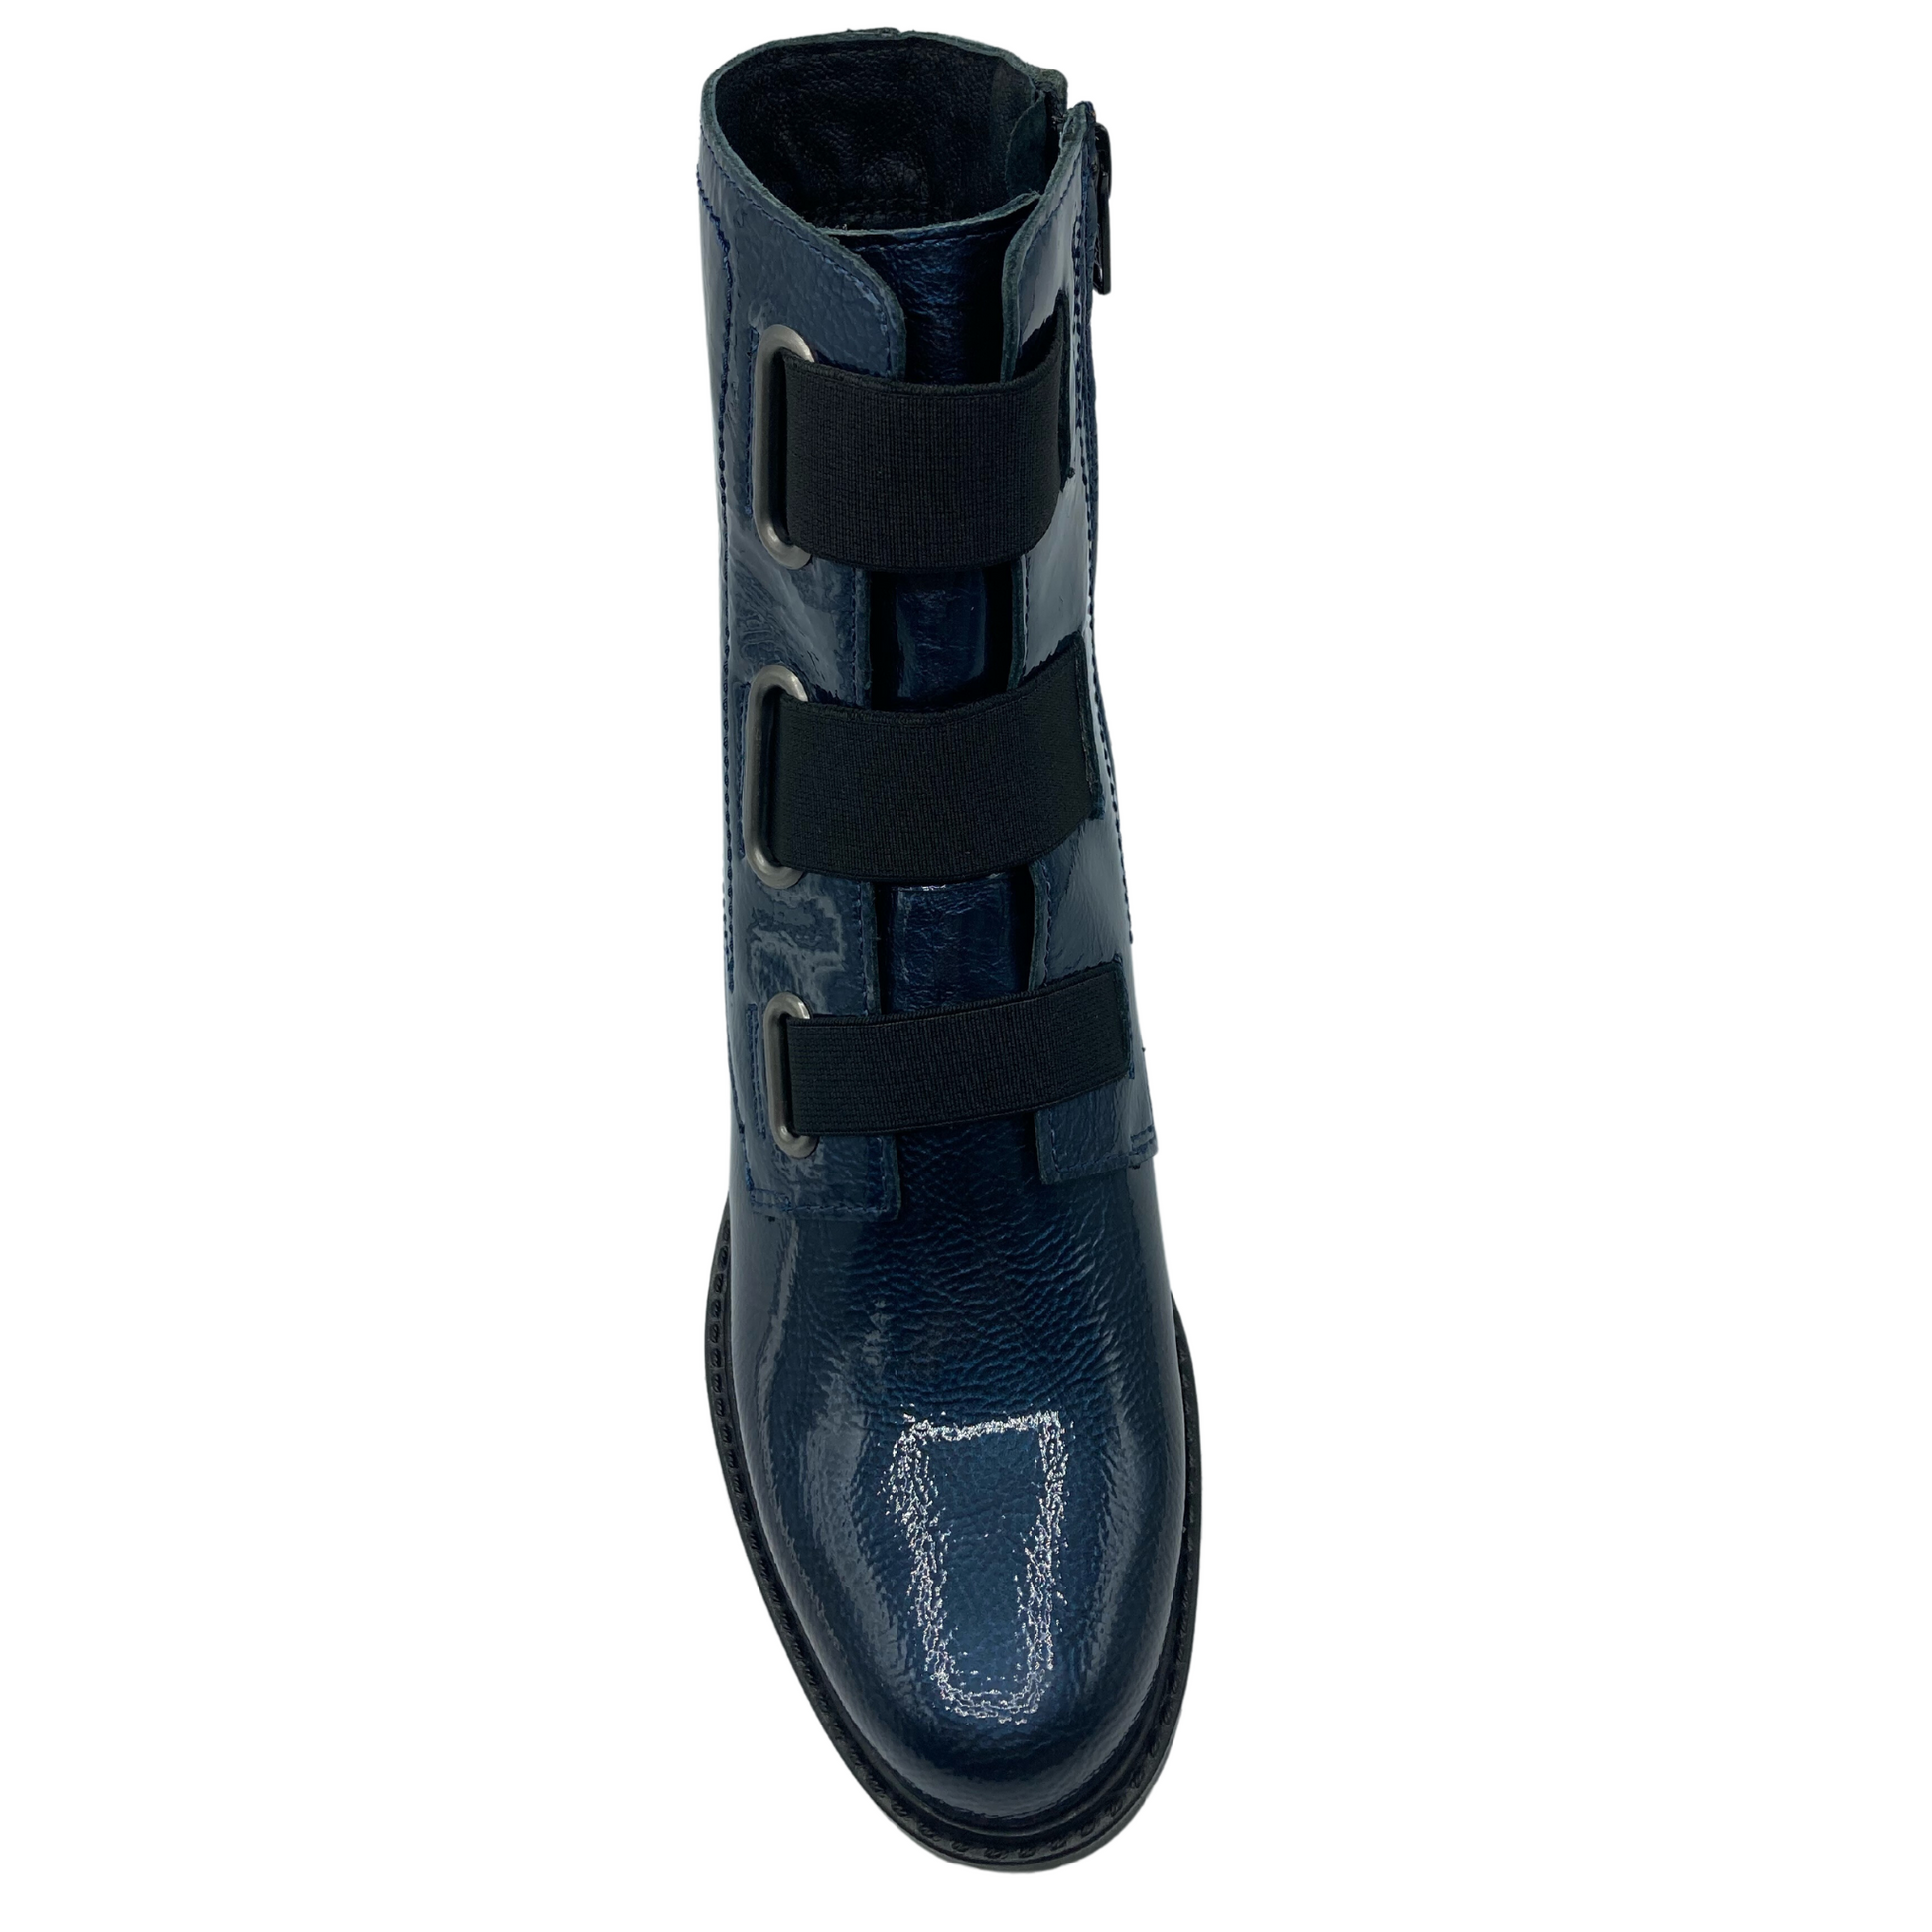 Front view of blue patent leather short boot with elastic front and side zipper closure